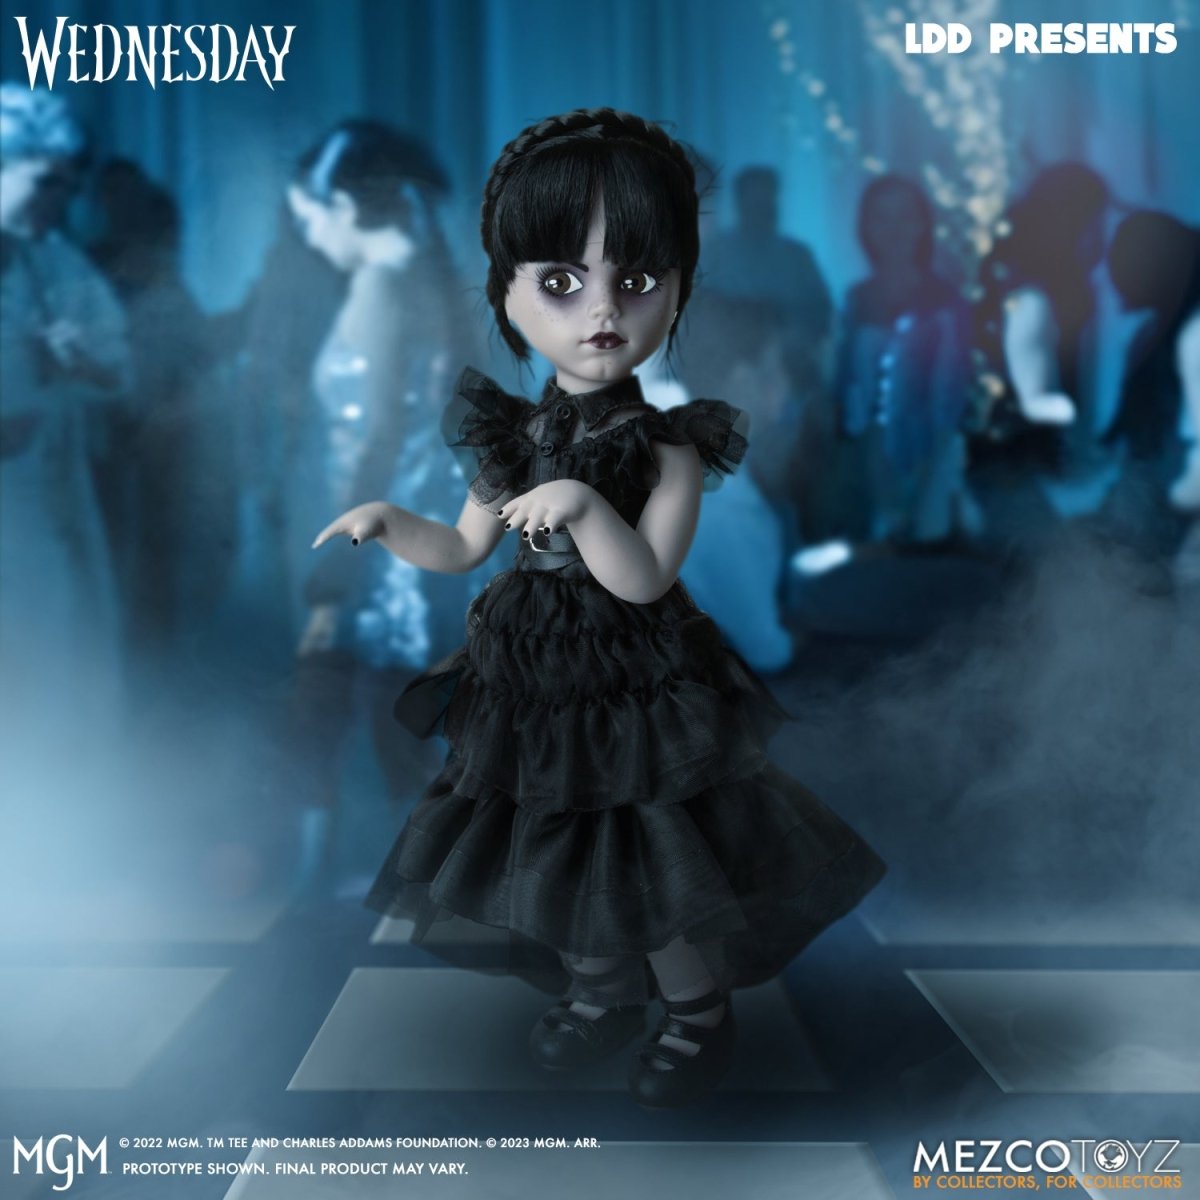 LDD Presents Wednesday Addams Dancing 10-Inch Doll - Simon's Collectibles